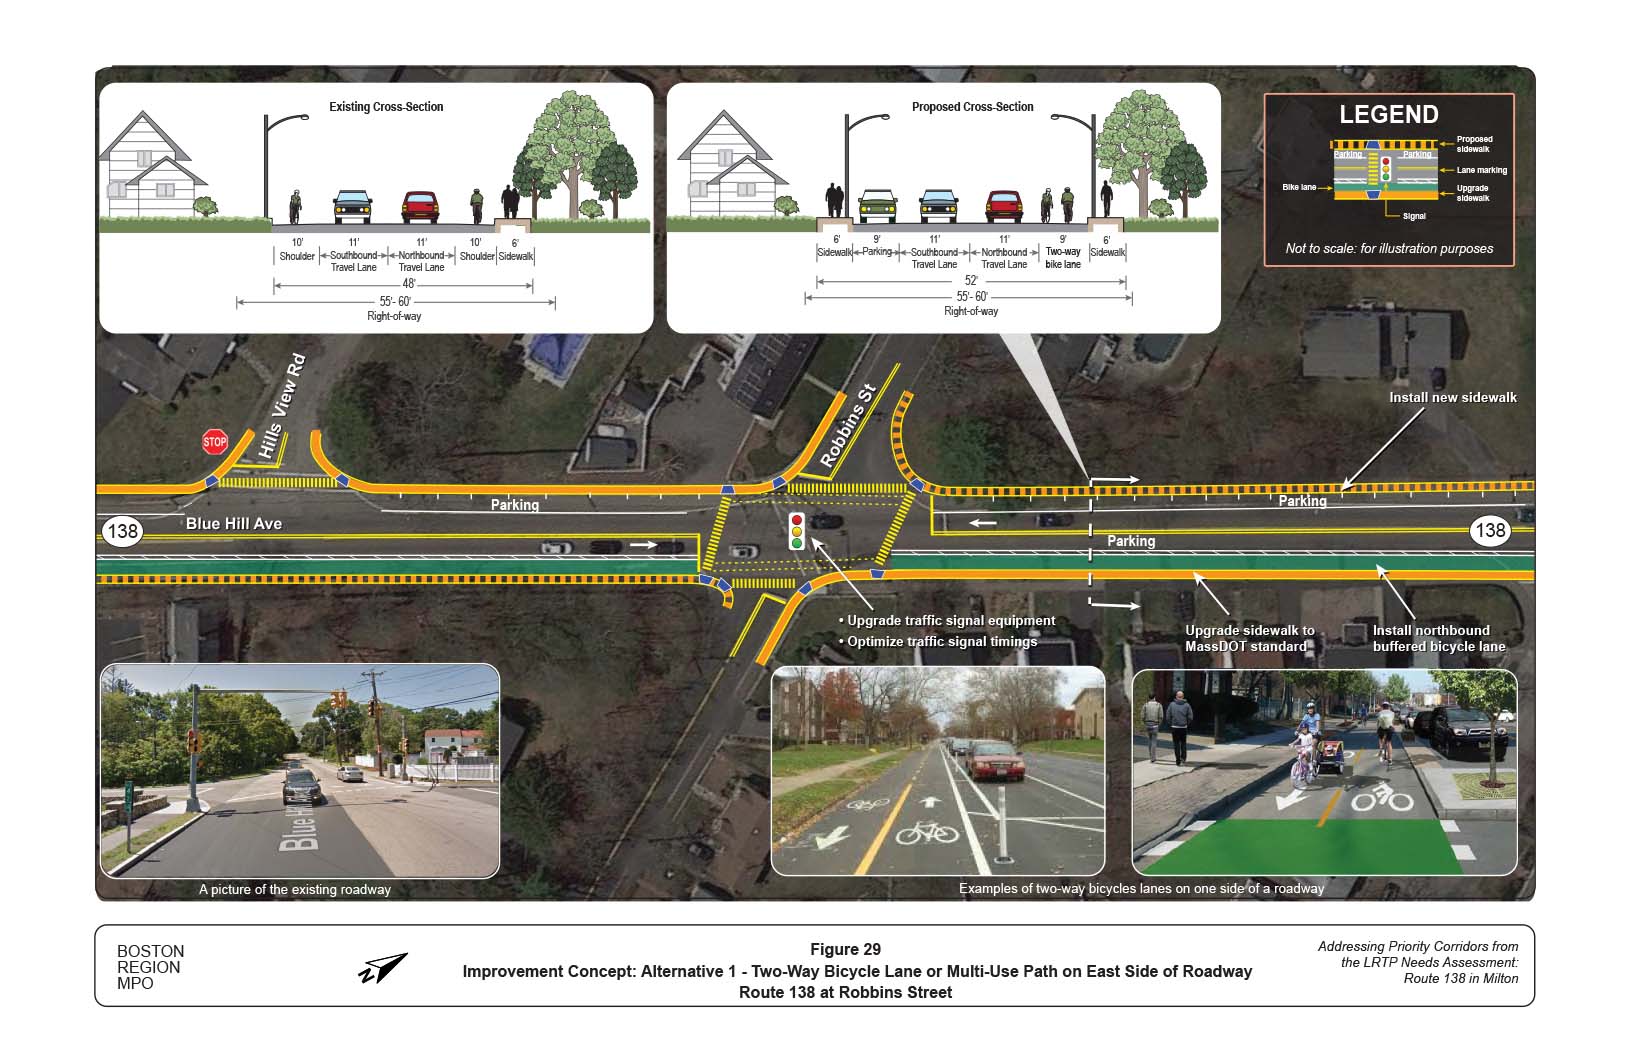 Figure 29 is an aerial photo of Route 138 at Robbins Street showing Alternative 1, a two-way bicycle Lane on the east side of the roadway, and overlays showing the existing and proposed cross-sections.